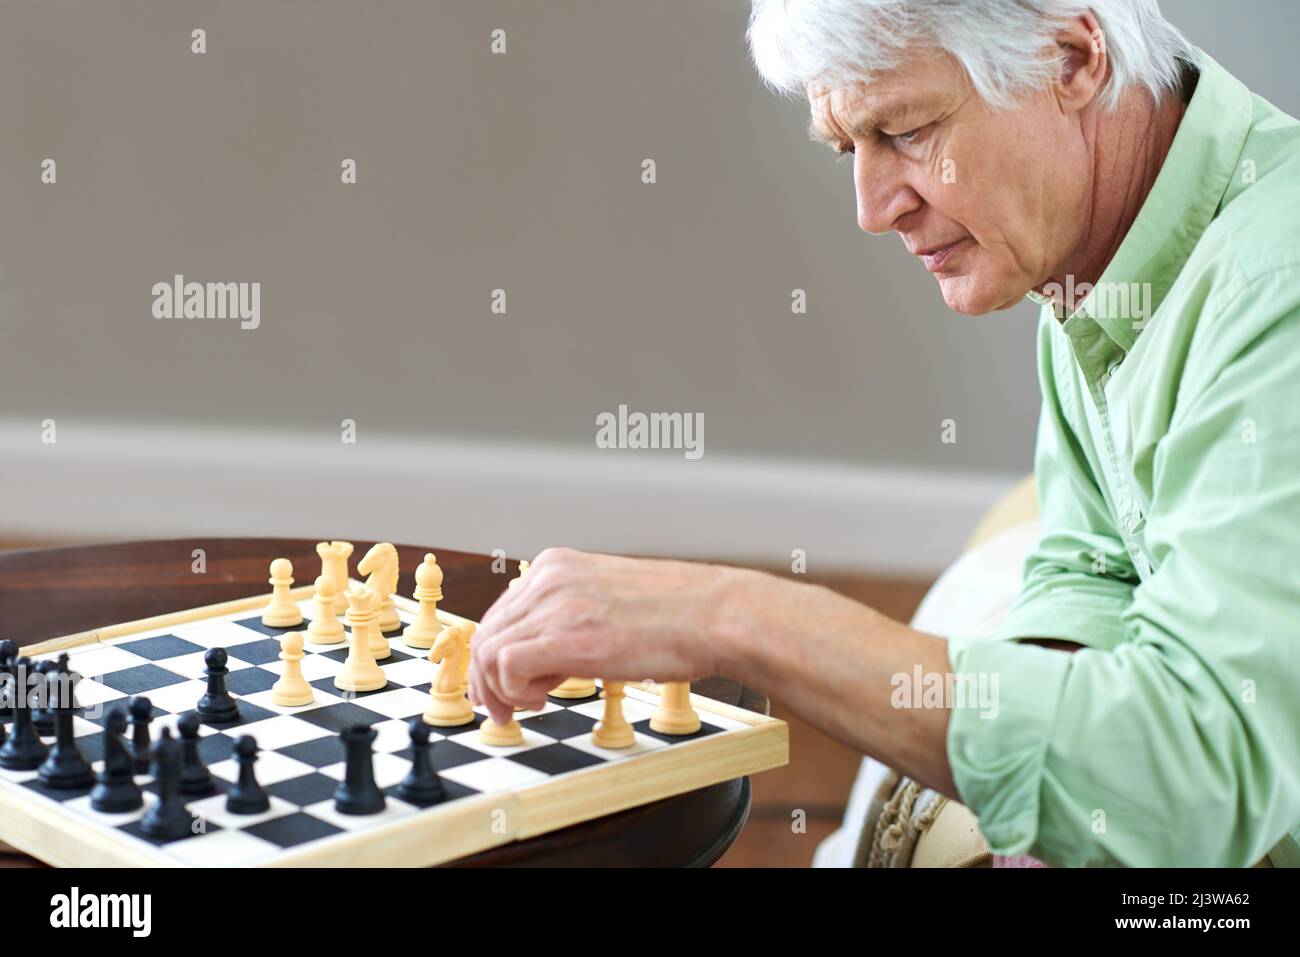 Elderly Man Contemplating Next Chess Move Stock Photo - Download Image Now  - Active Lifestyle, Active Seniors, Adult - iStock